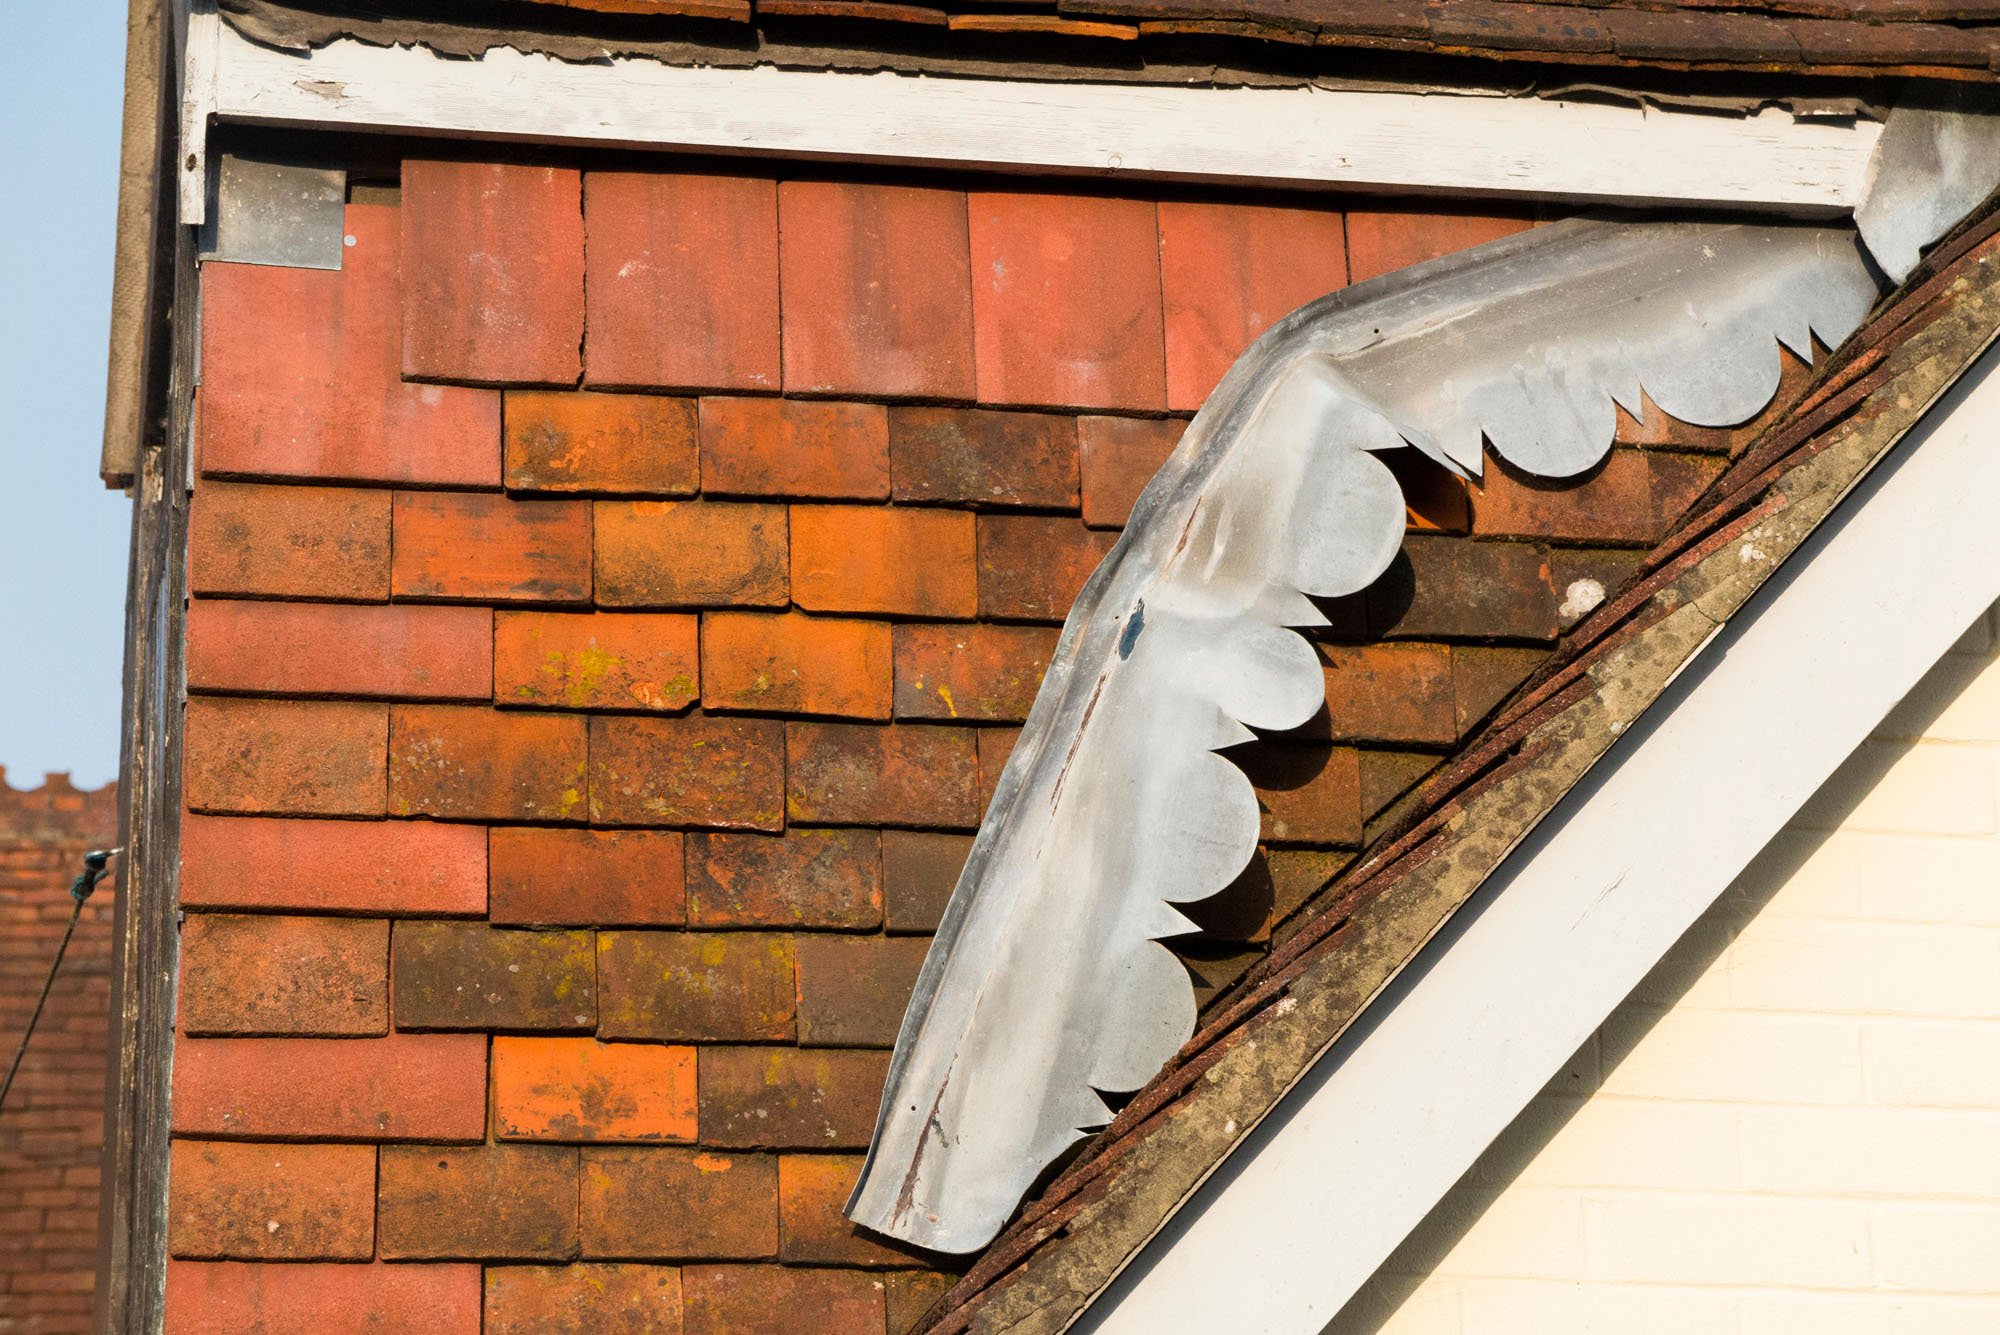 A section of lead flashing which is detached from the roof and has dropped down, only being held in place at one end.